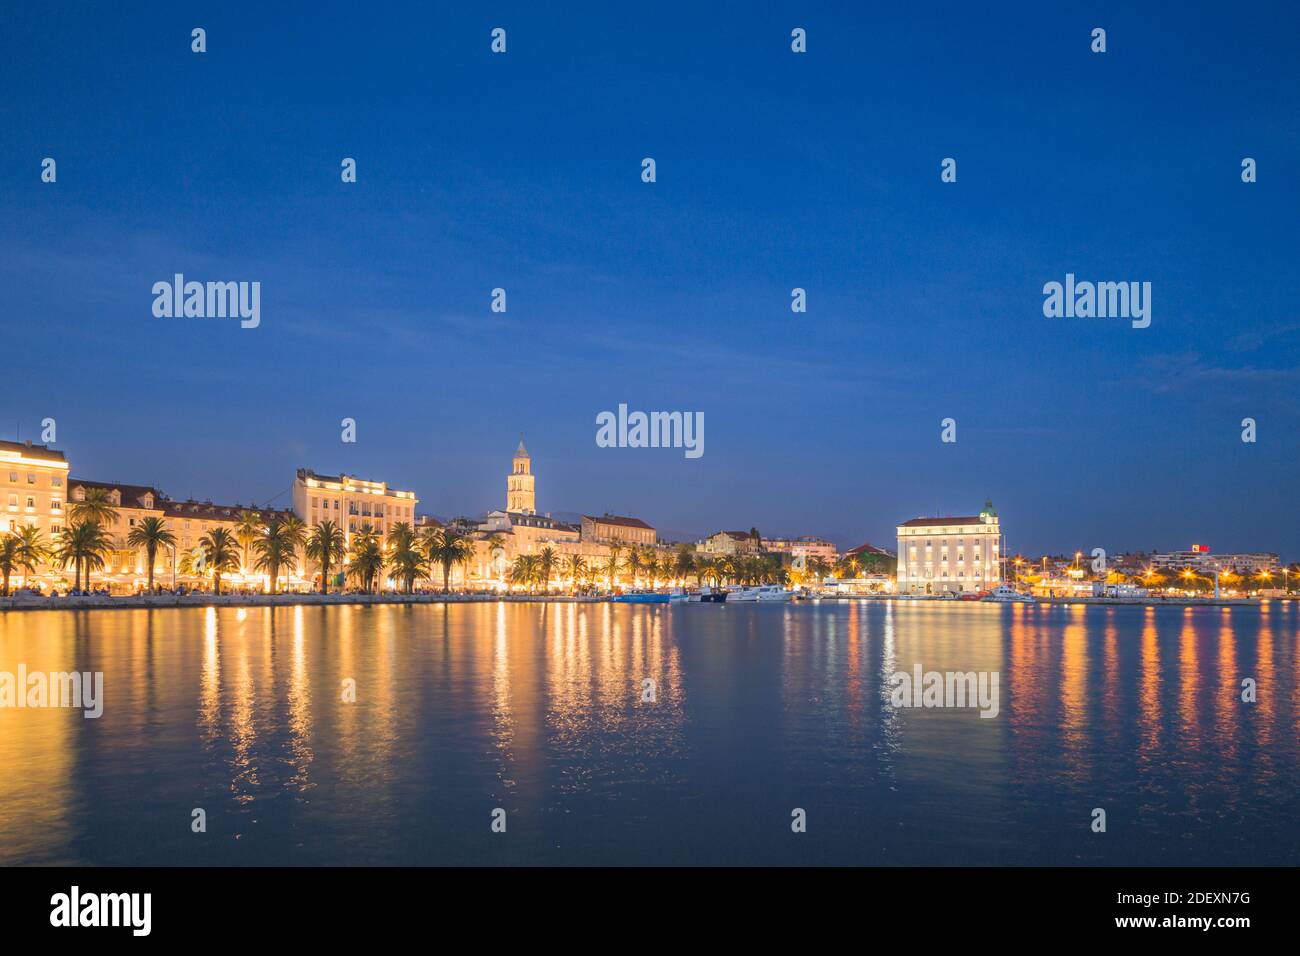 A view of Old Town Split, Croatia during Blue Hour on a summer's evening. Stock Photo